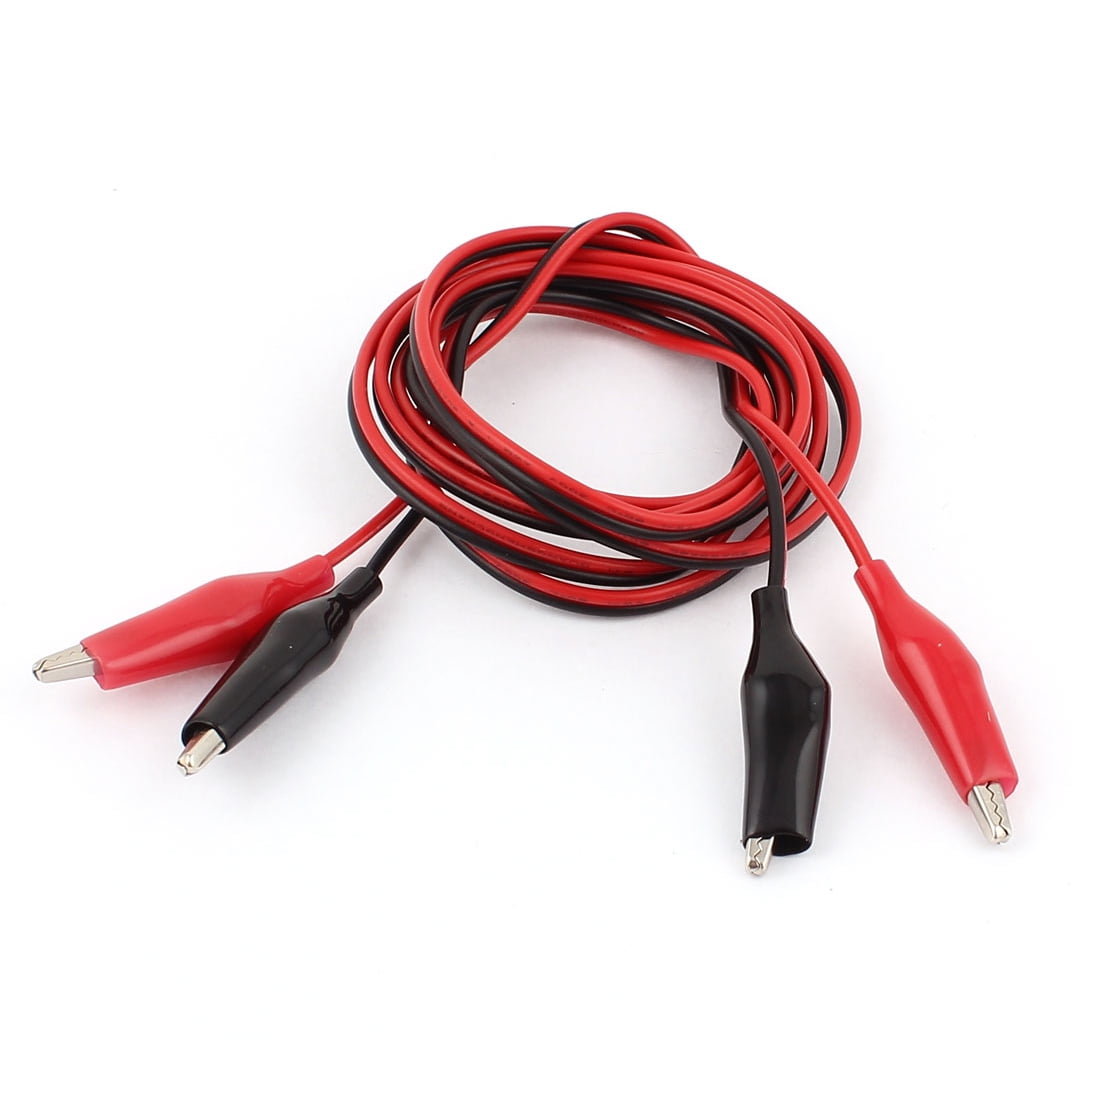 2 PCS HEAVY DUTY Crocodile Clip Jumper Wire Leads Test Cable Red Black 50Cms 